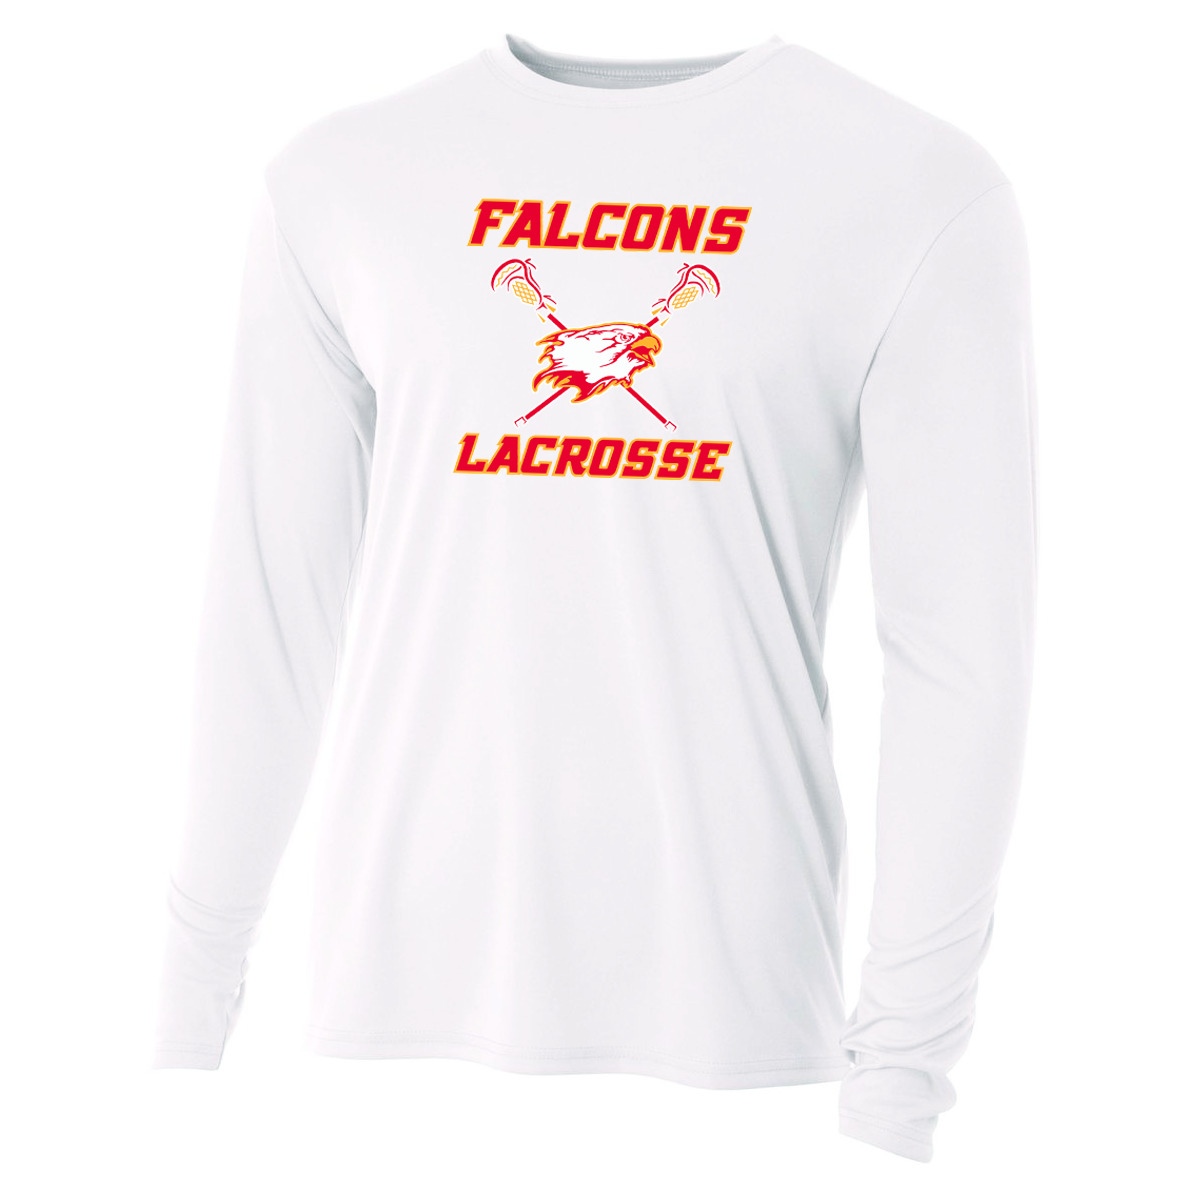 Falcons Lacrosse Club Cooling Performance Long Sleeve Crew